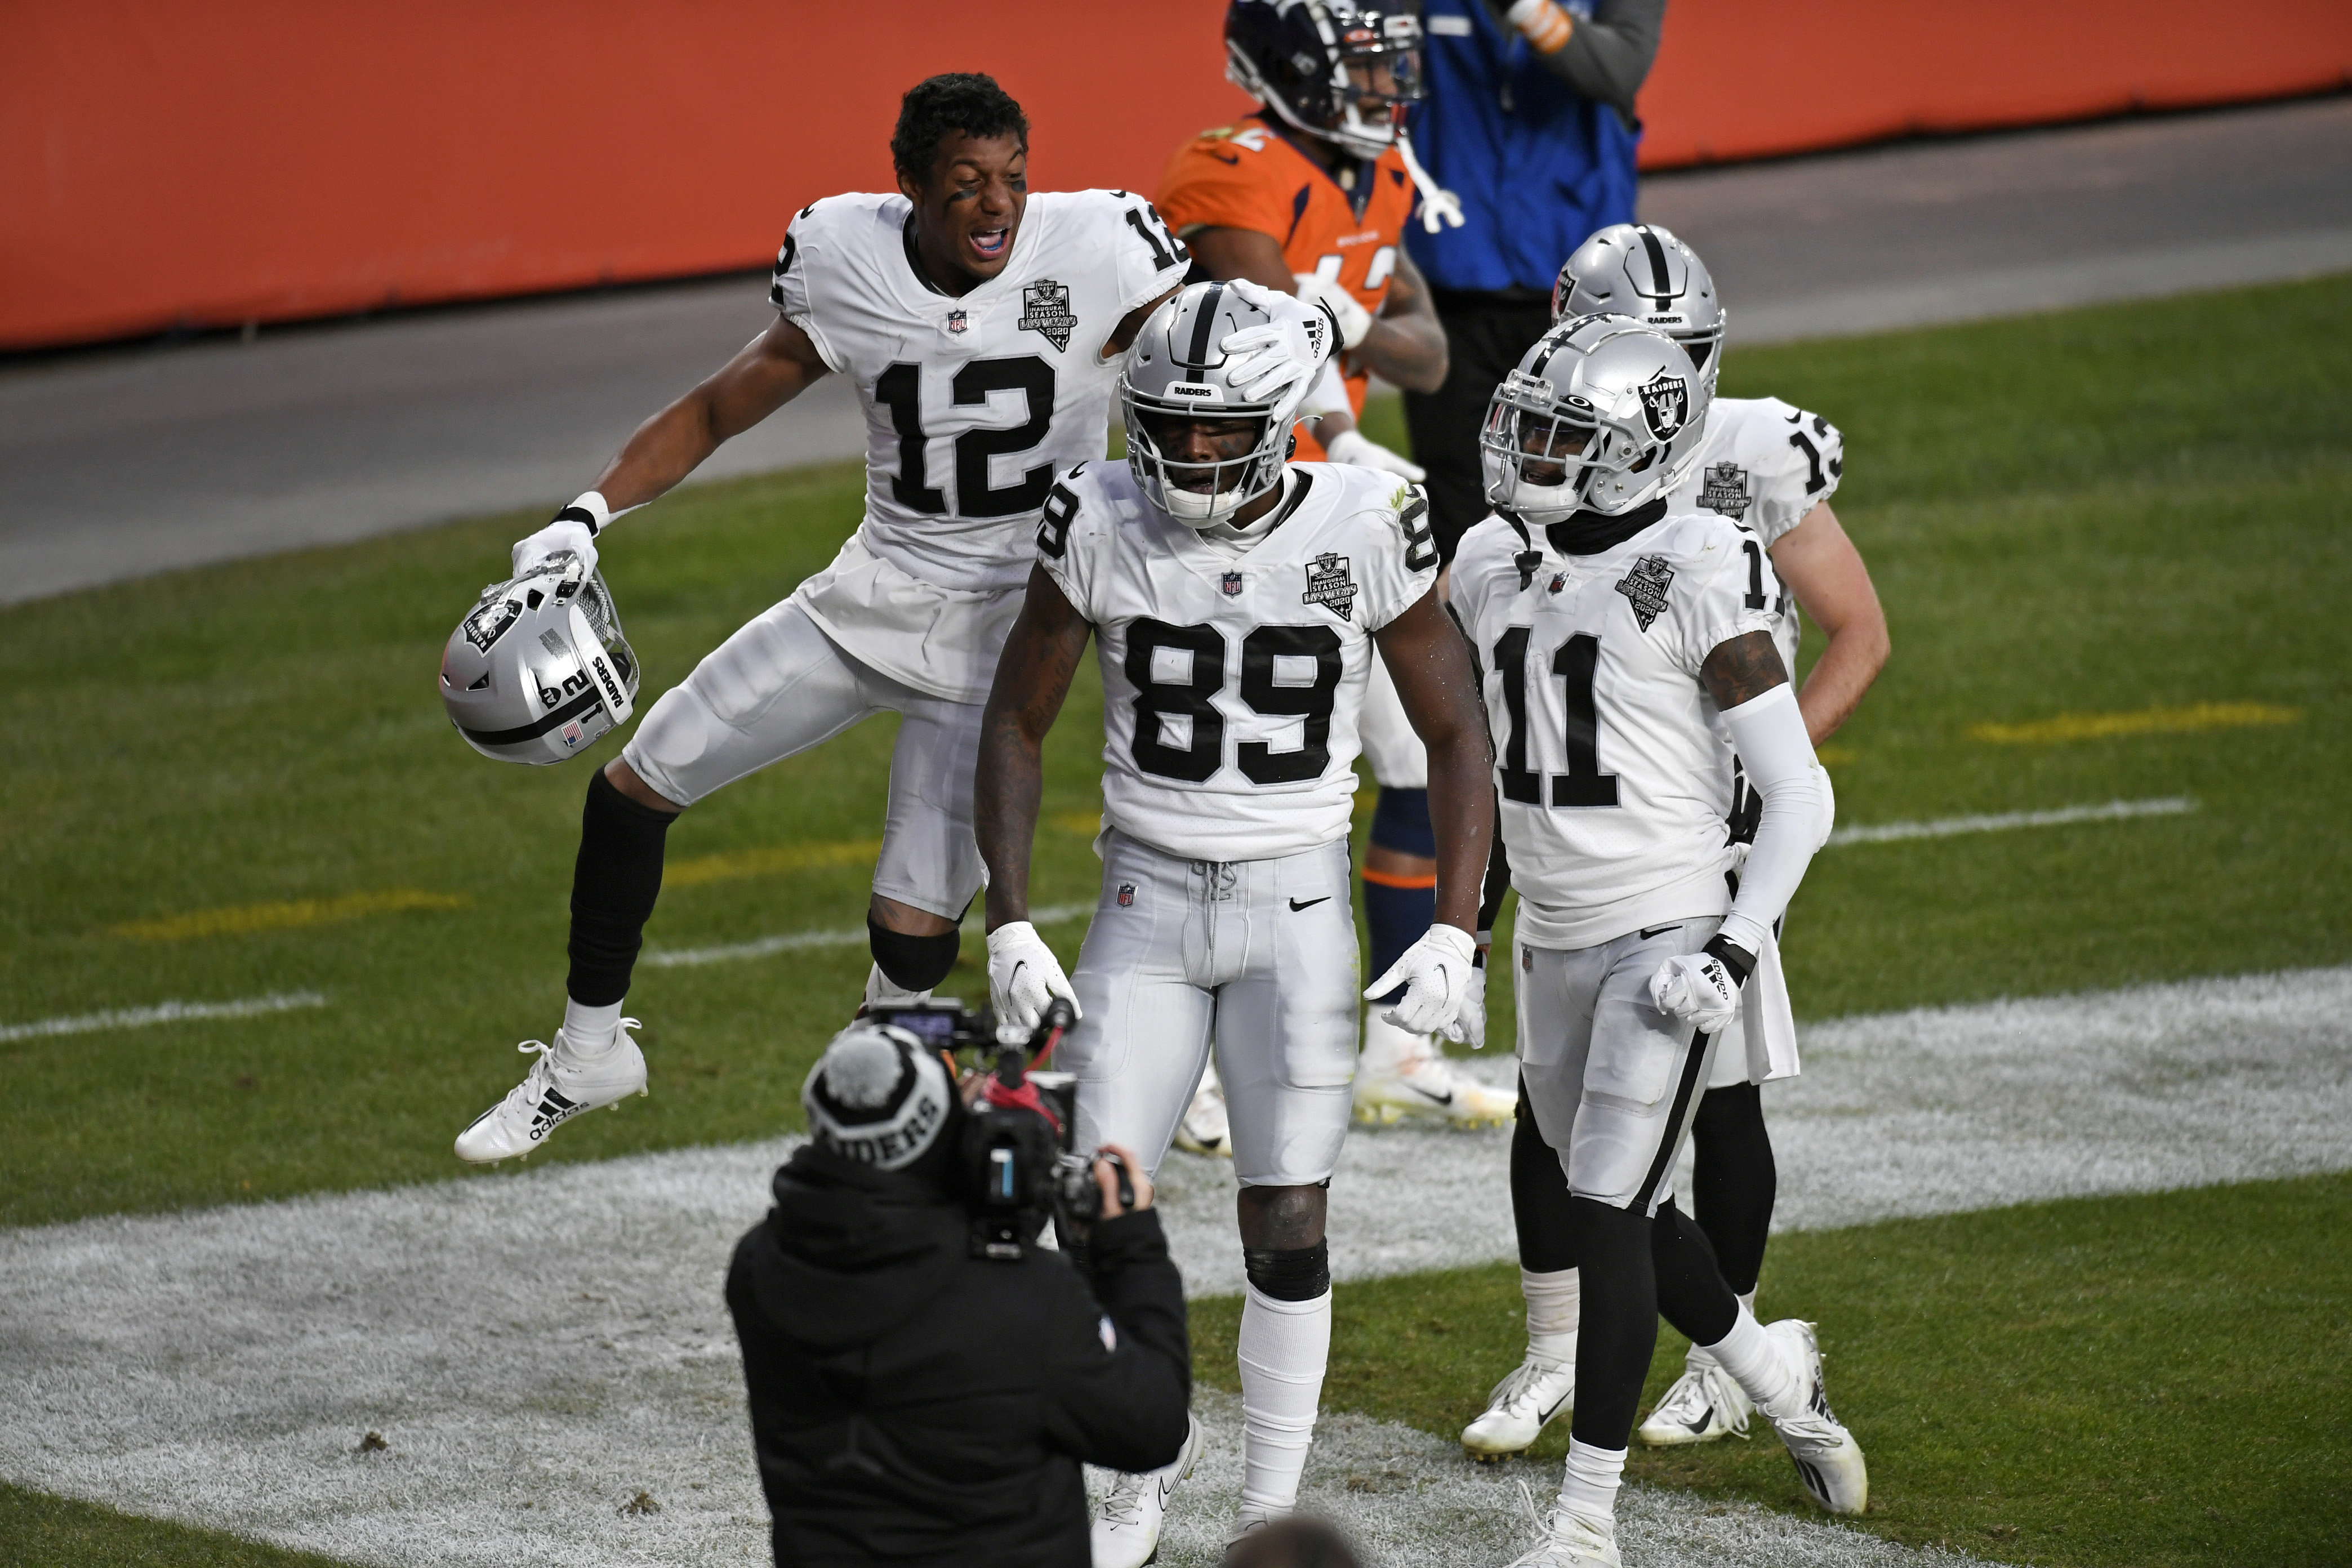 Las Vegas Raiders wide receivers celebrate in the end zone after a touchdown